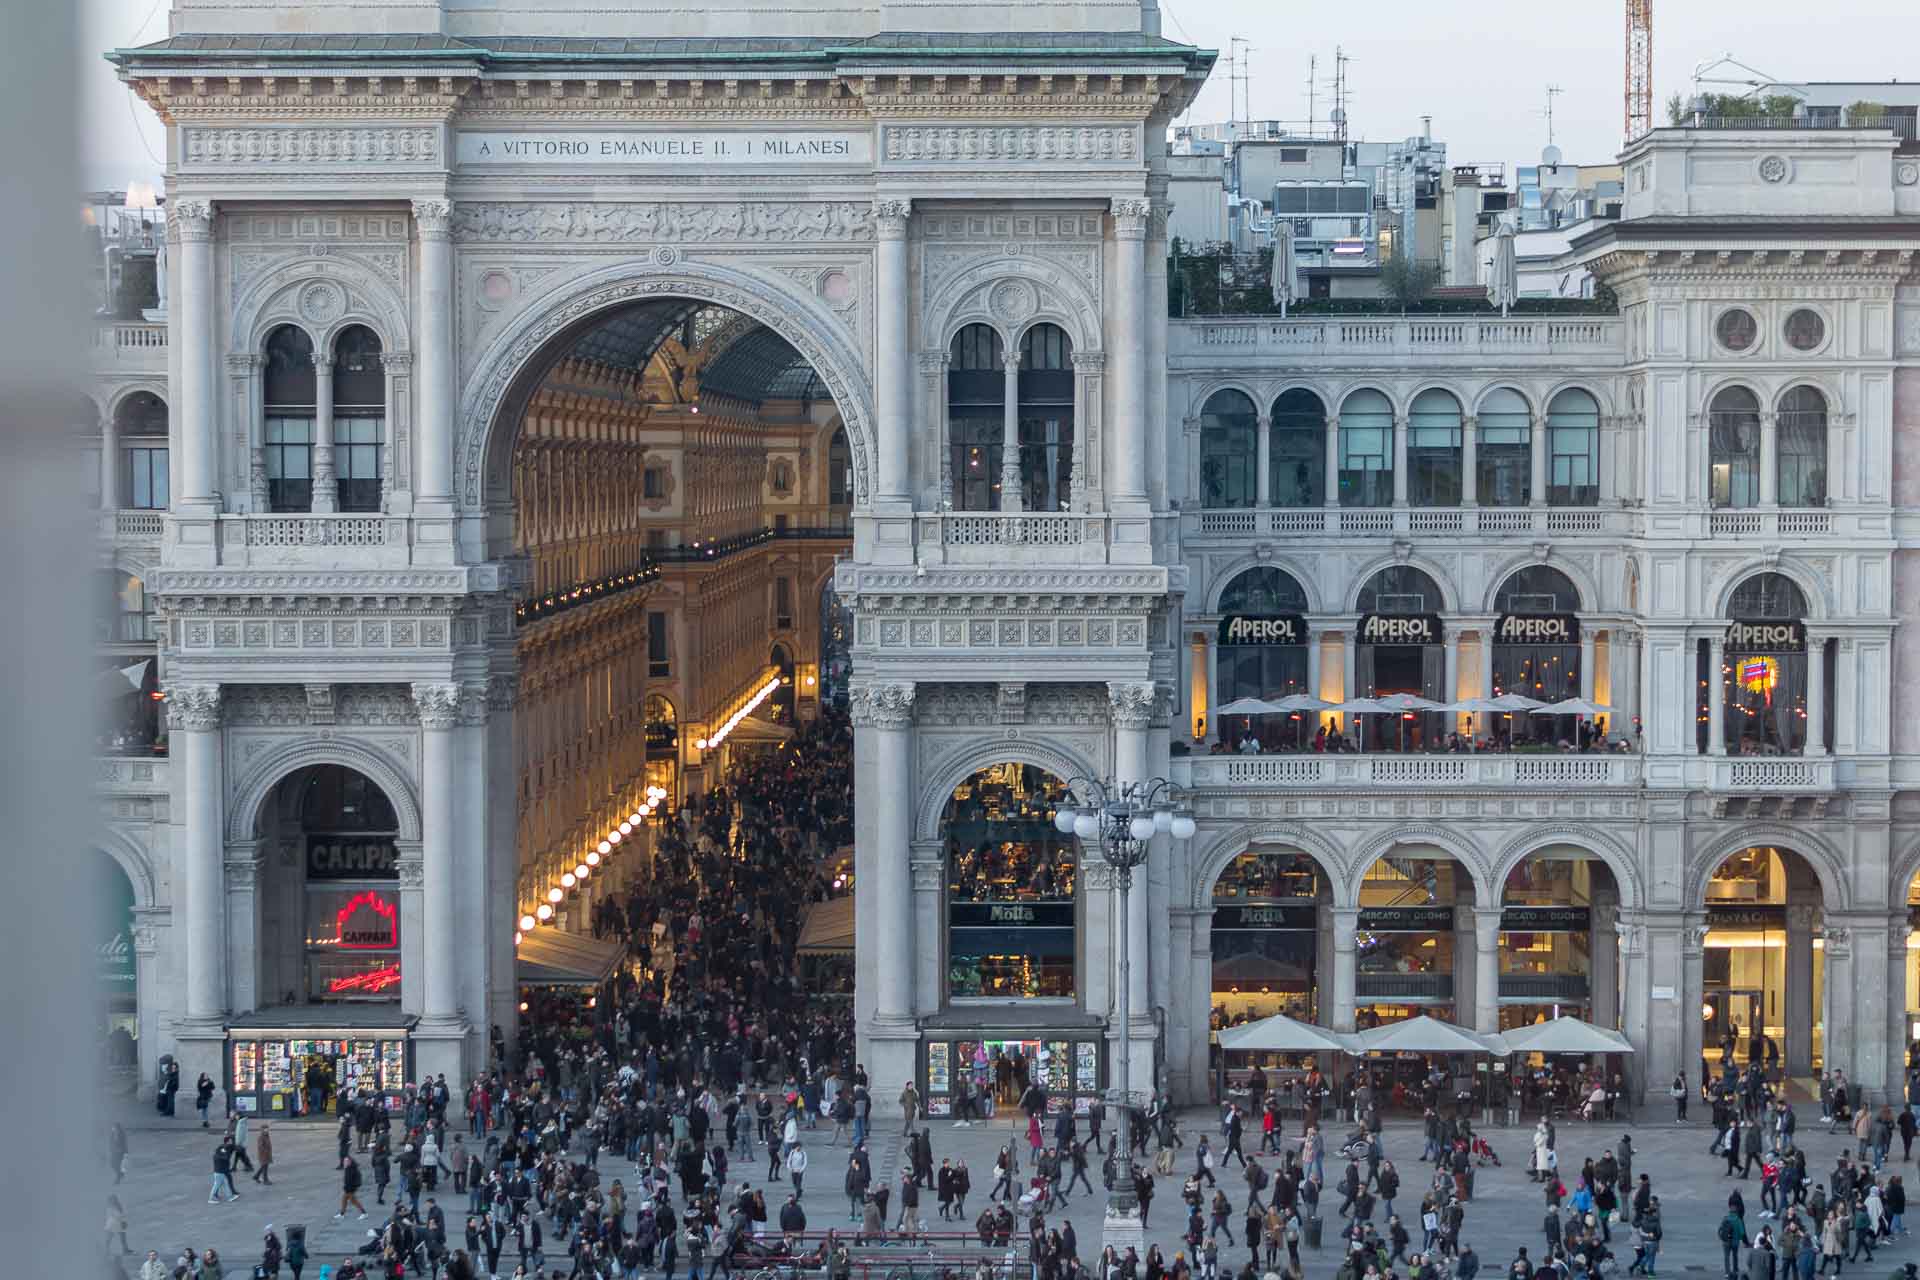 A view of the Vittorio Emanuele II Gallery in Milan full of people and a massive entrance arch